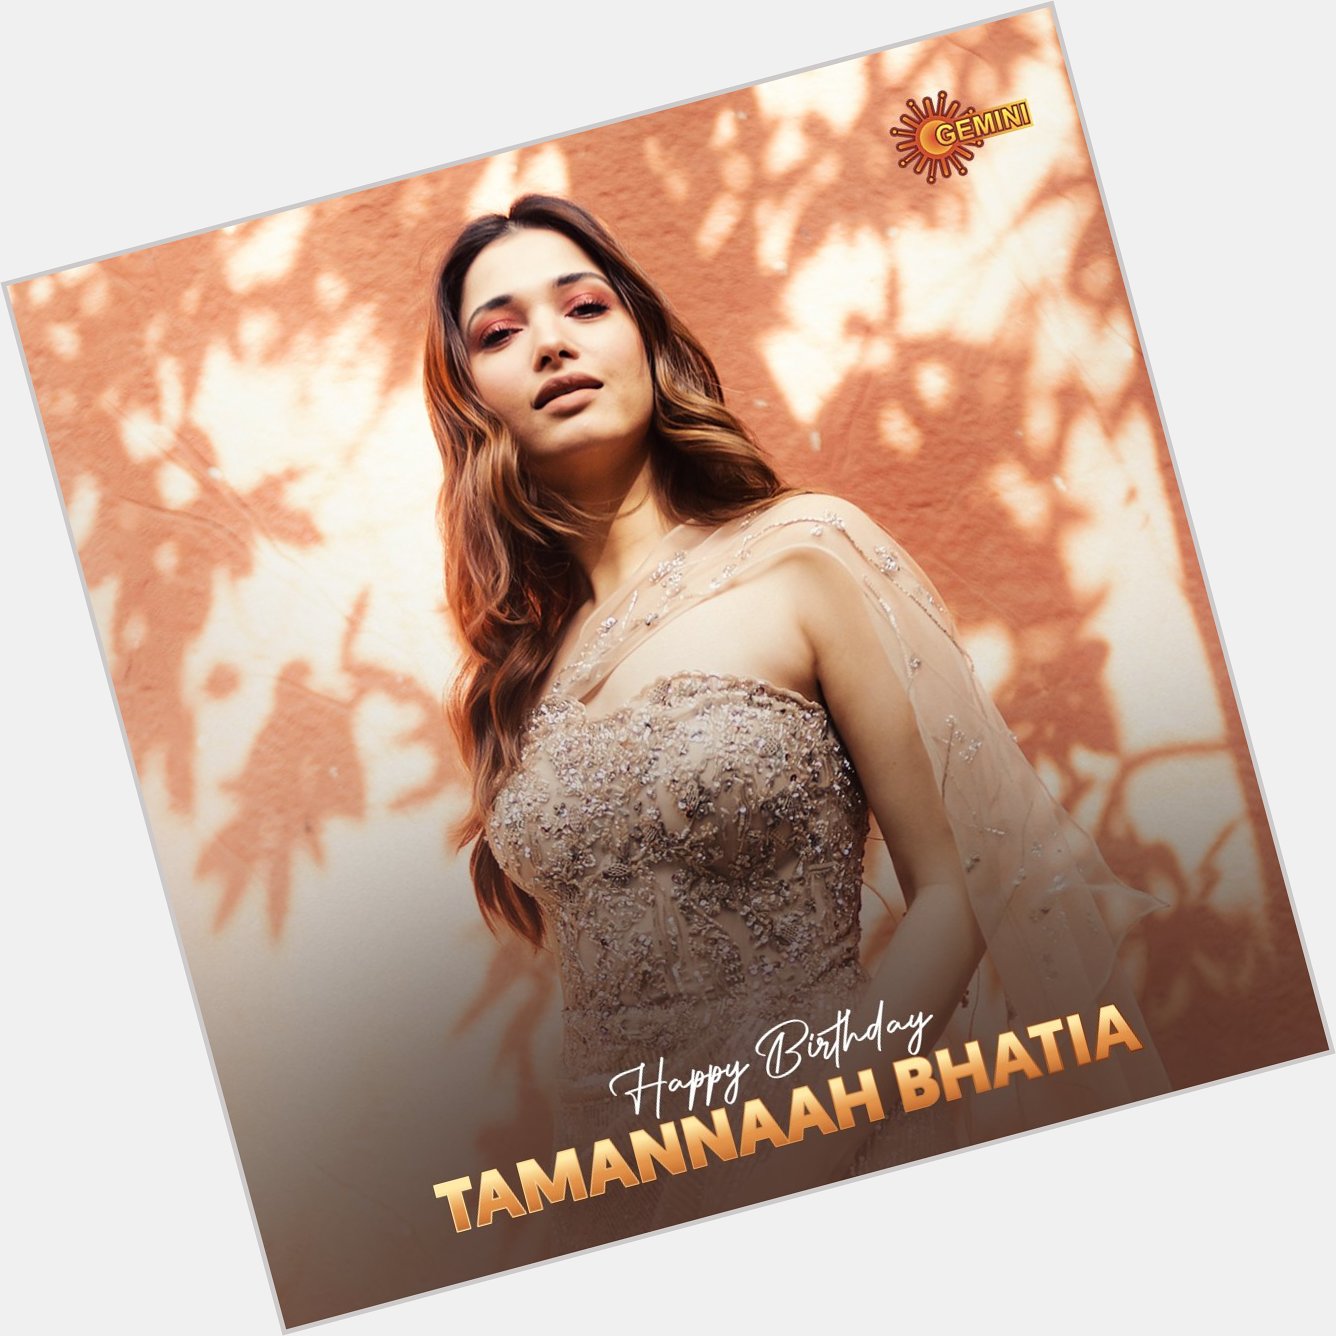 Wishing gorgeous and talented actress Tamannaah Bhatia a very Happy Birthday.  